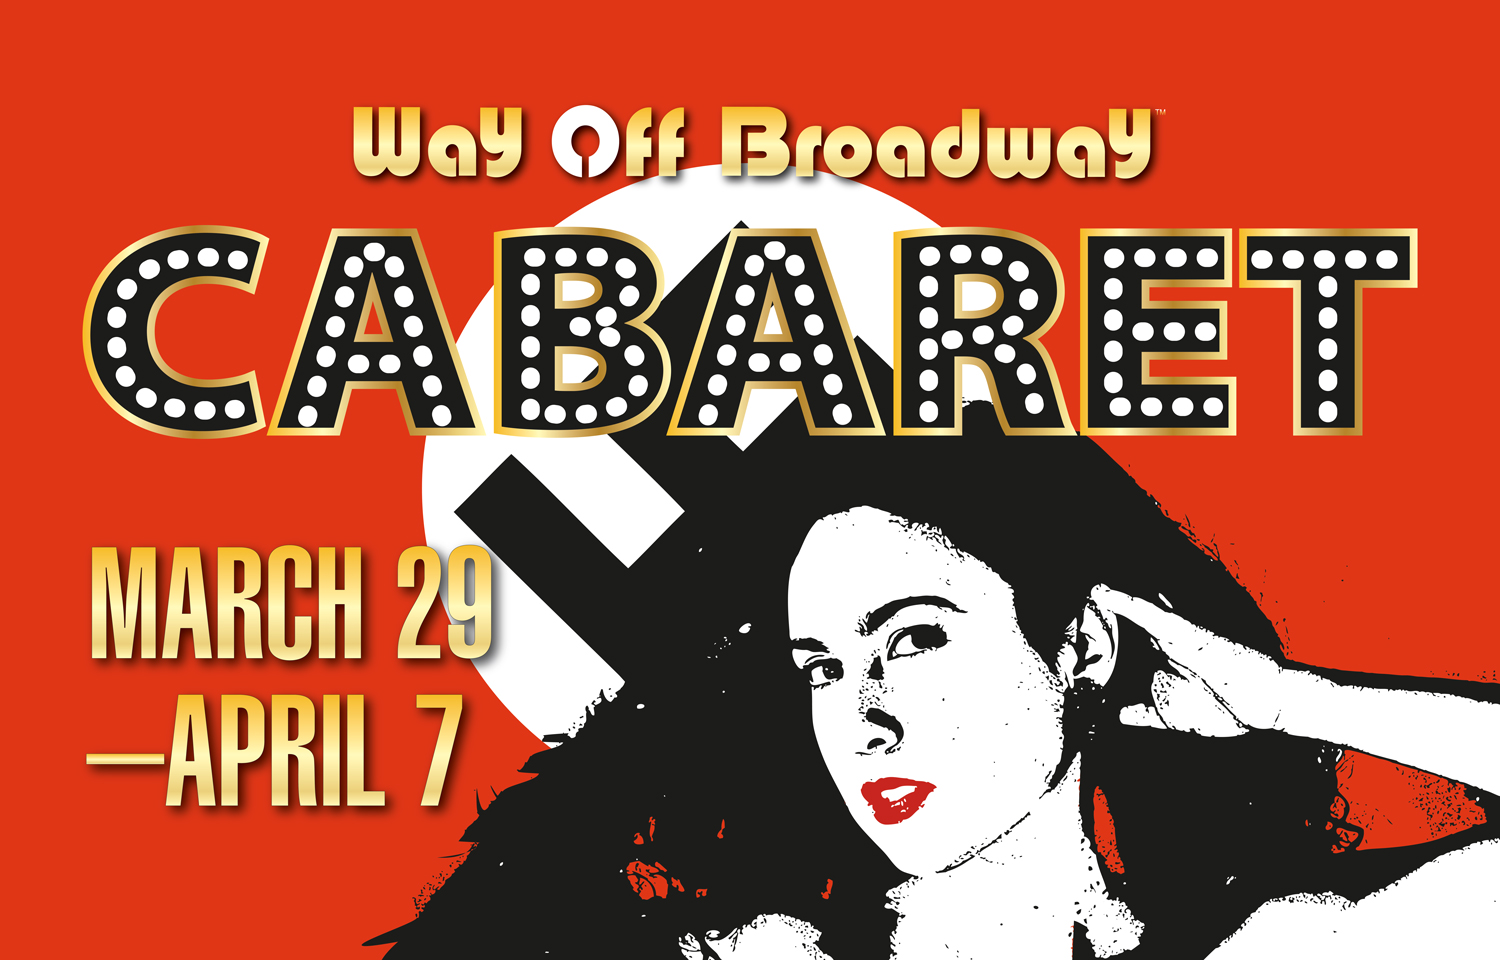 Way Off Broadway Show Banners